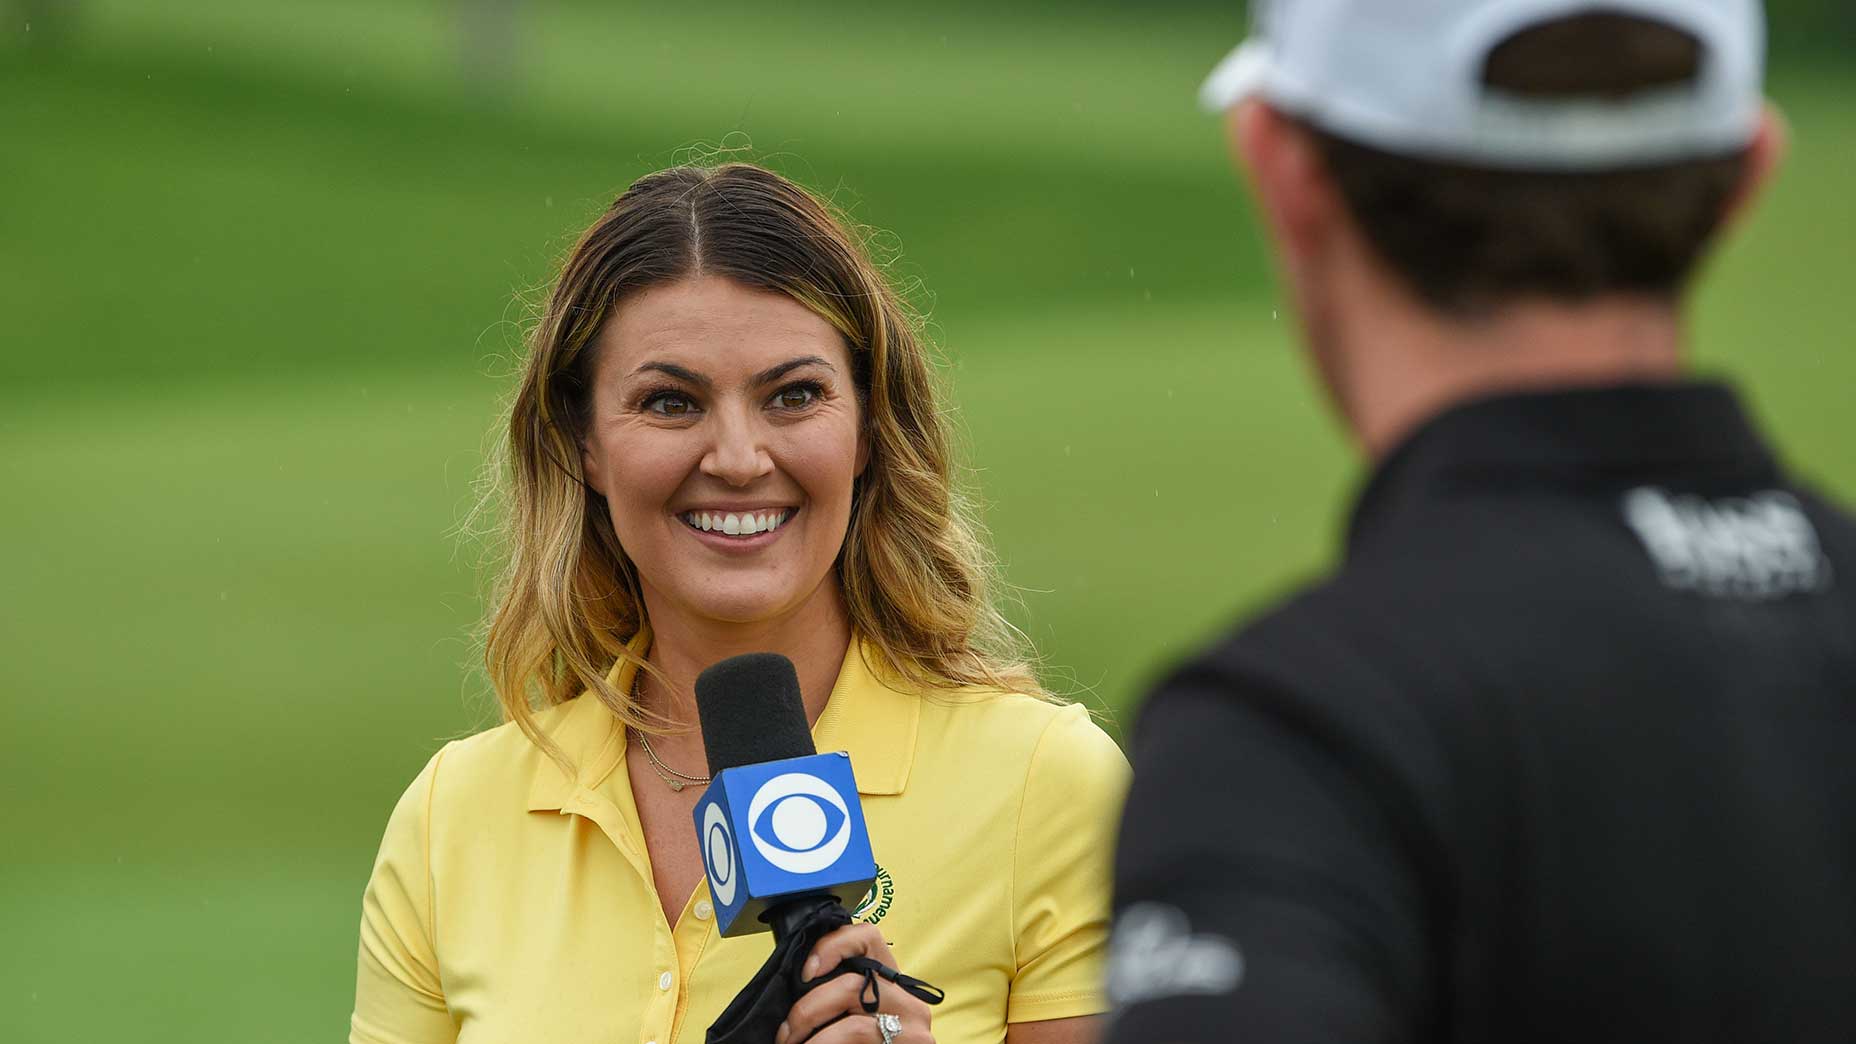 7 noticeable changes coming to CBS golf broadcasts in 2022